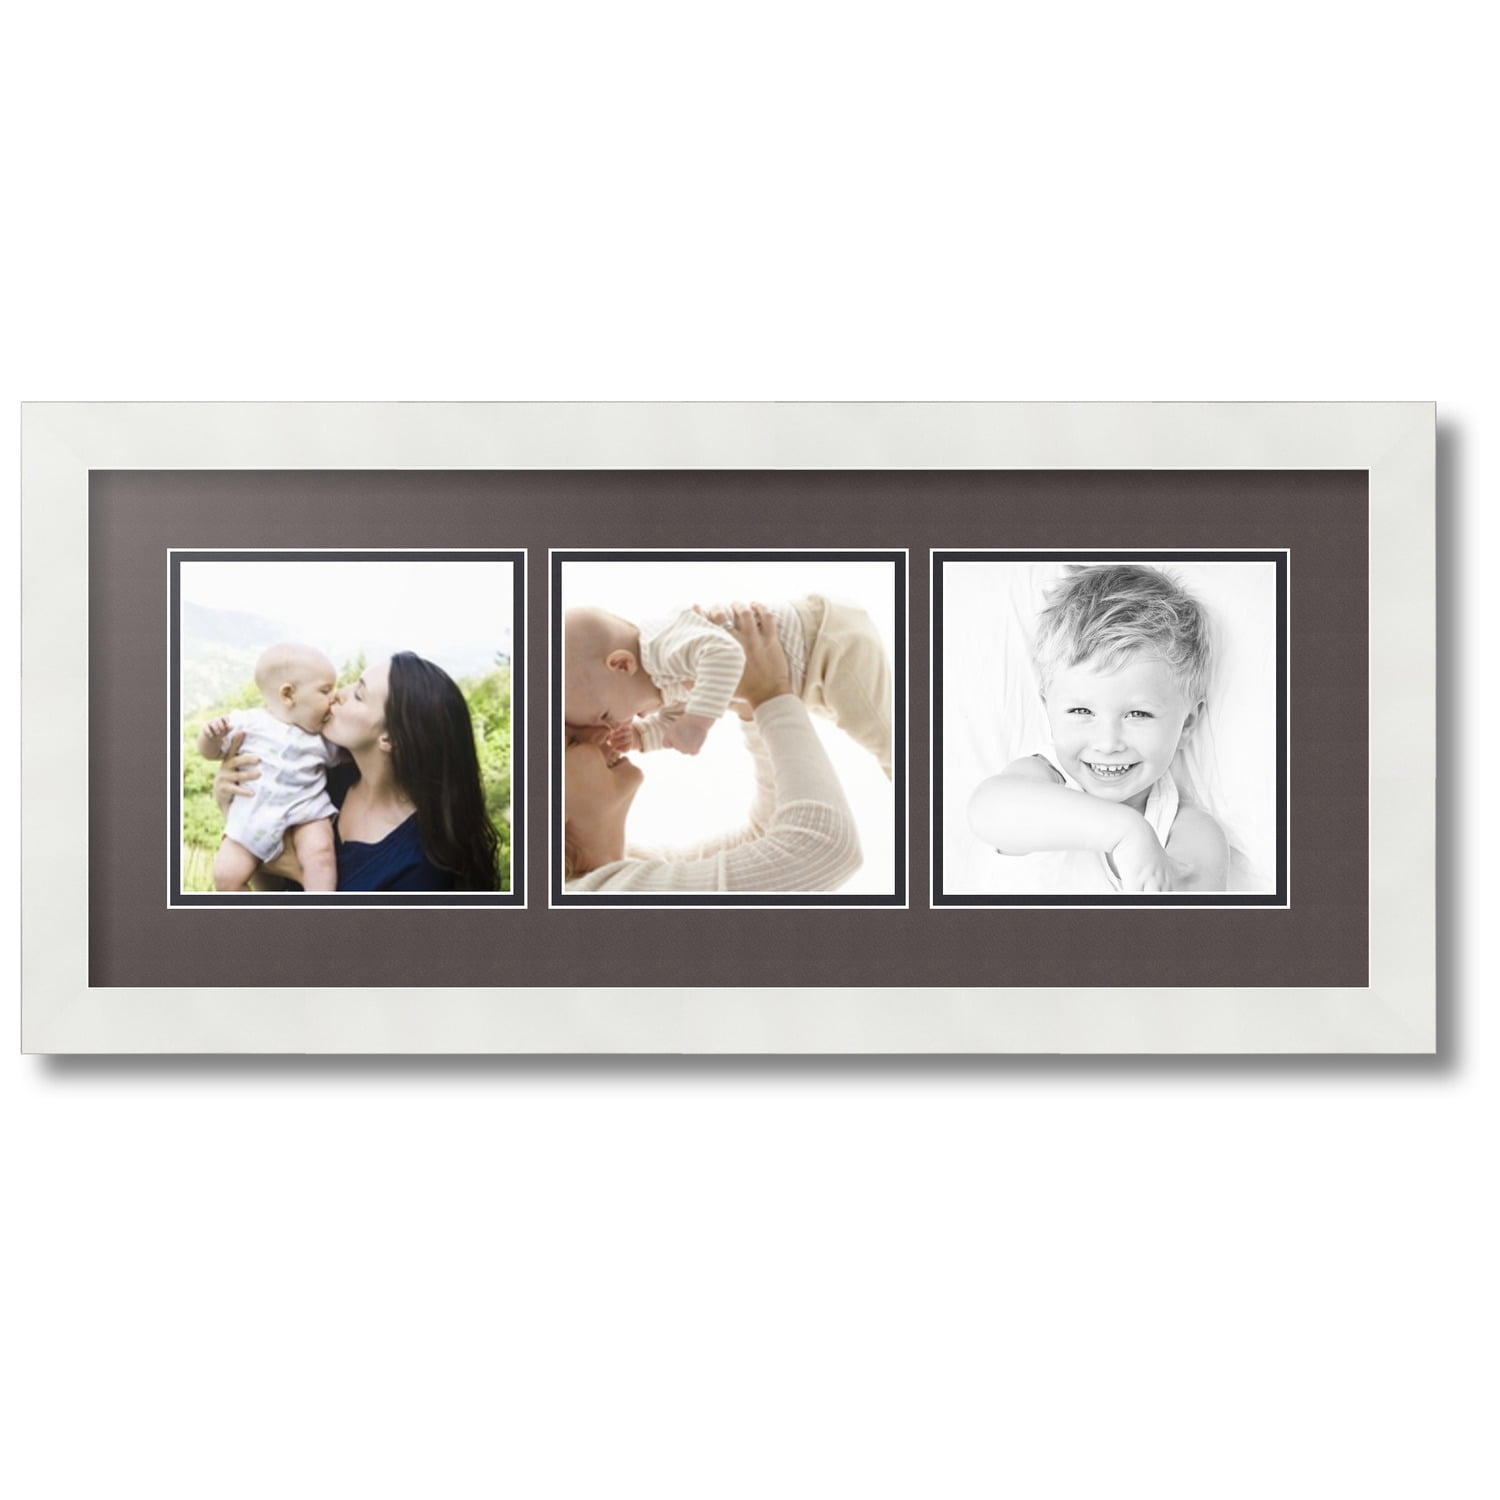  ZXT-parts 6x6 Picture Frames White 3.5x3.5 Picture Frame with  Mat, Solid Wood.Front Opening 5.5x5.5 without Mat. Table or Wall. Plastic  Panels.The Protective Film must be Removed. : Everything Else